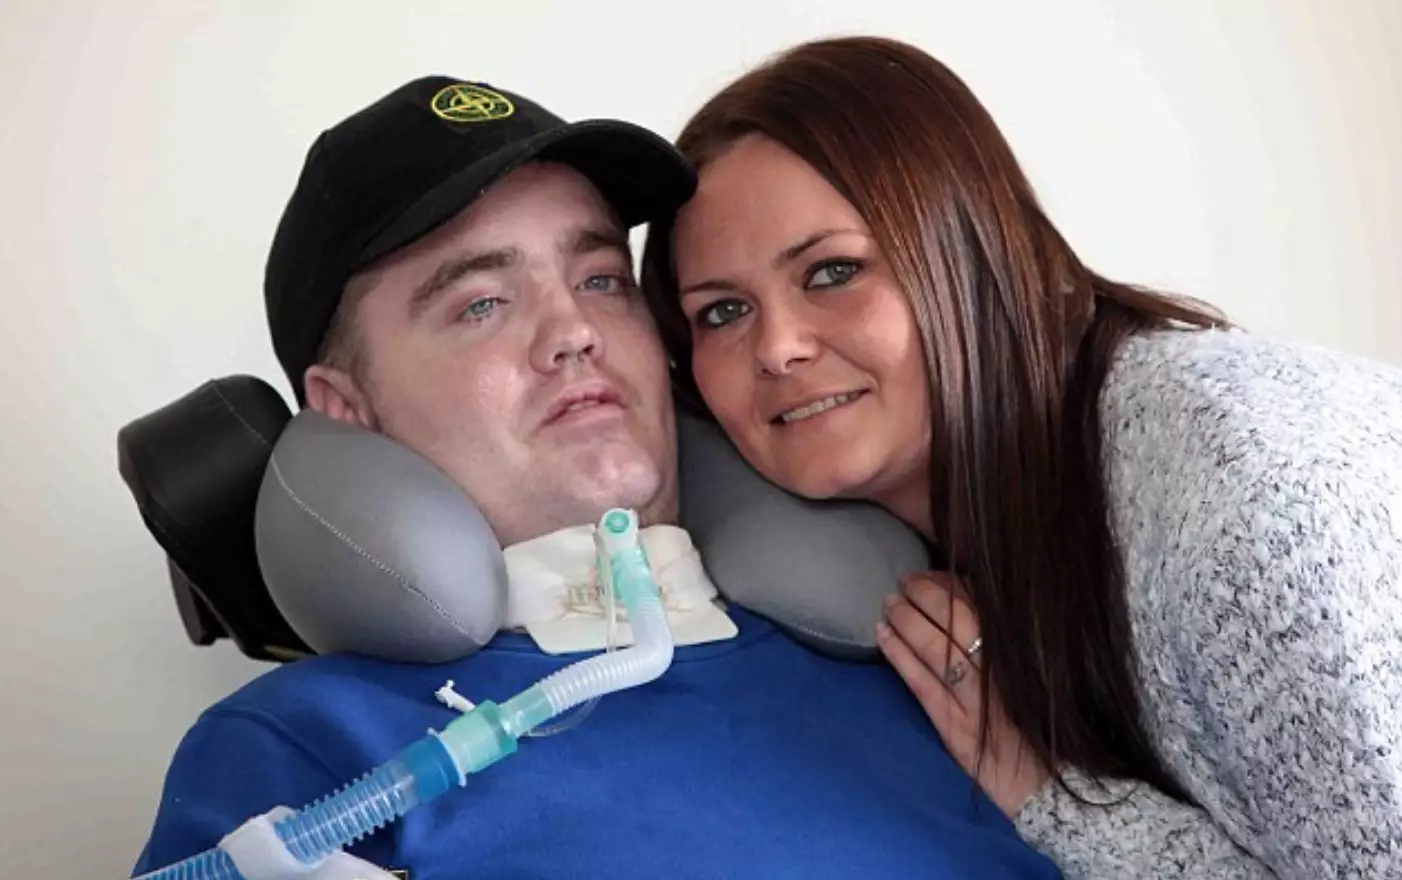 Man Involved In Terrible Car Accident Marries Girlfriend And Passes Away